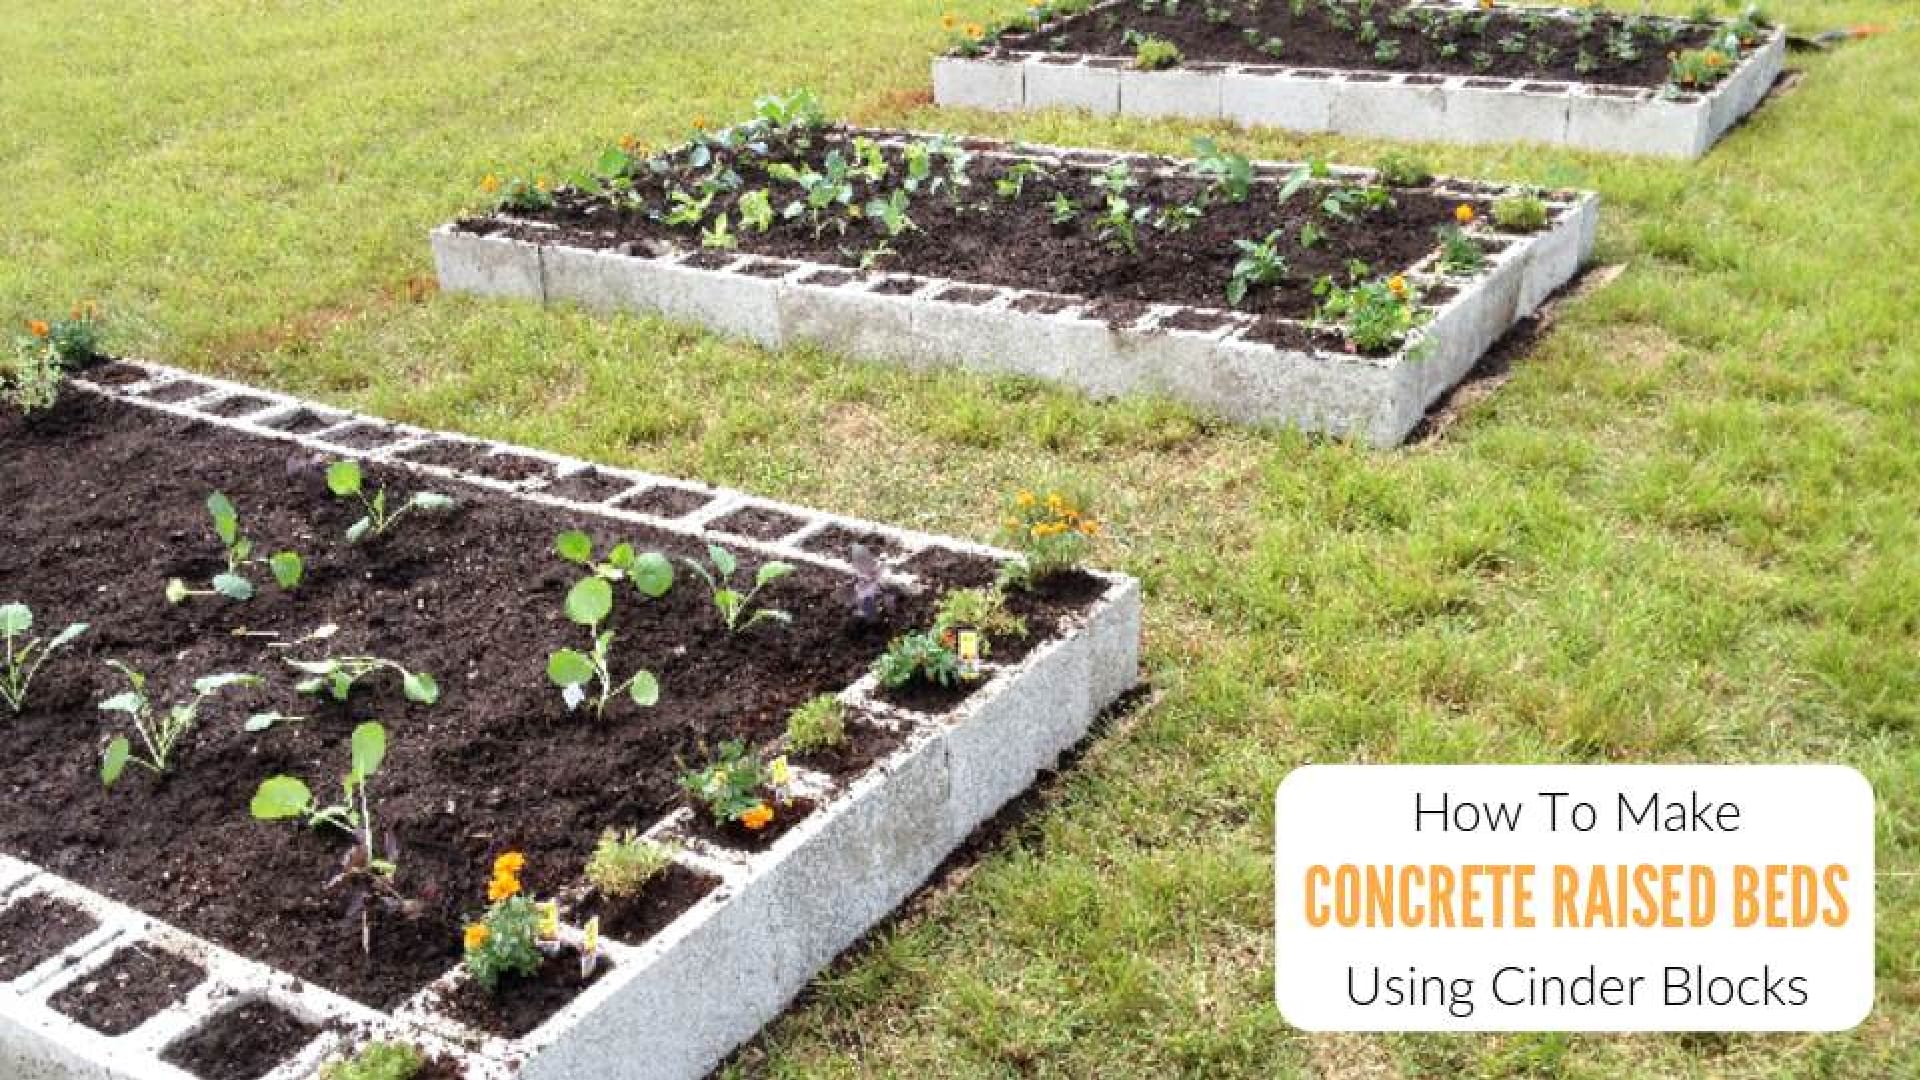 How To Make A Raised Garden Bed Using Concrete Blocks Step-By-Step